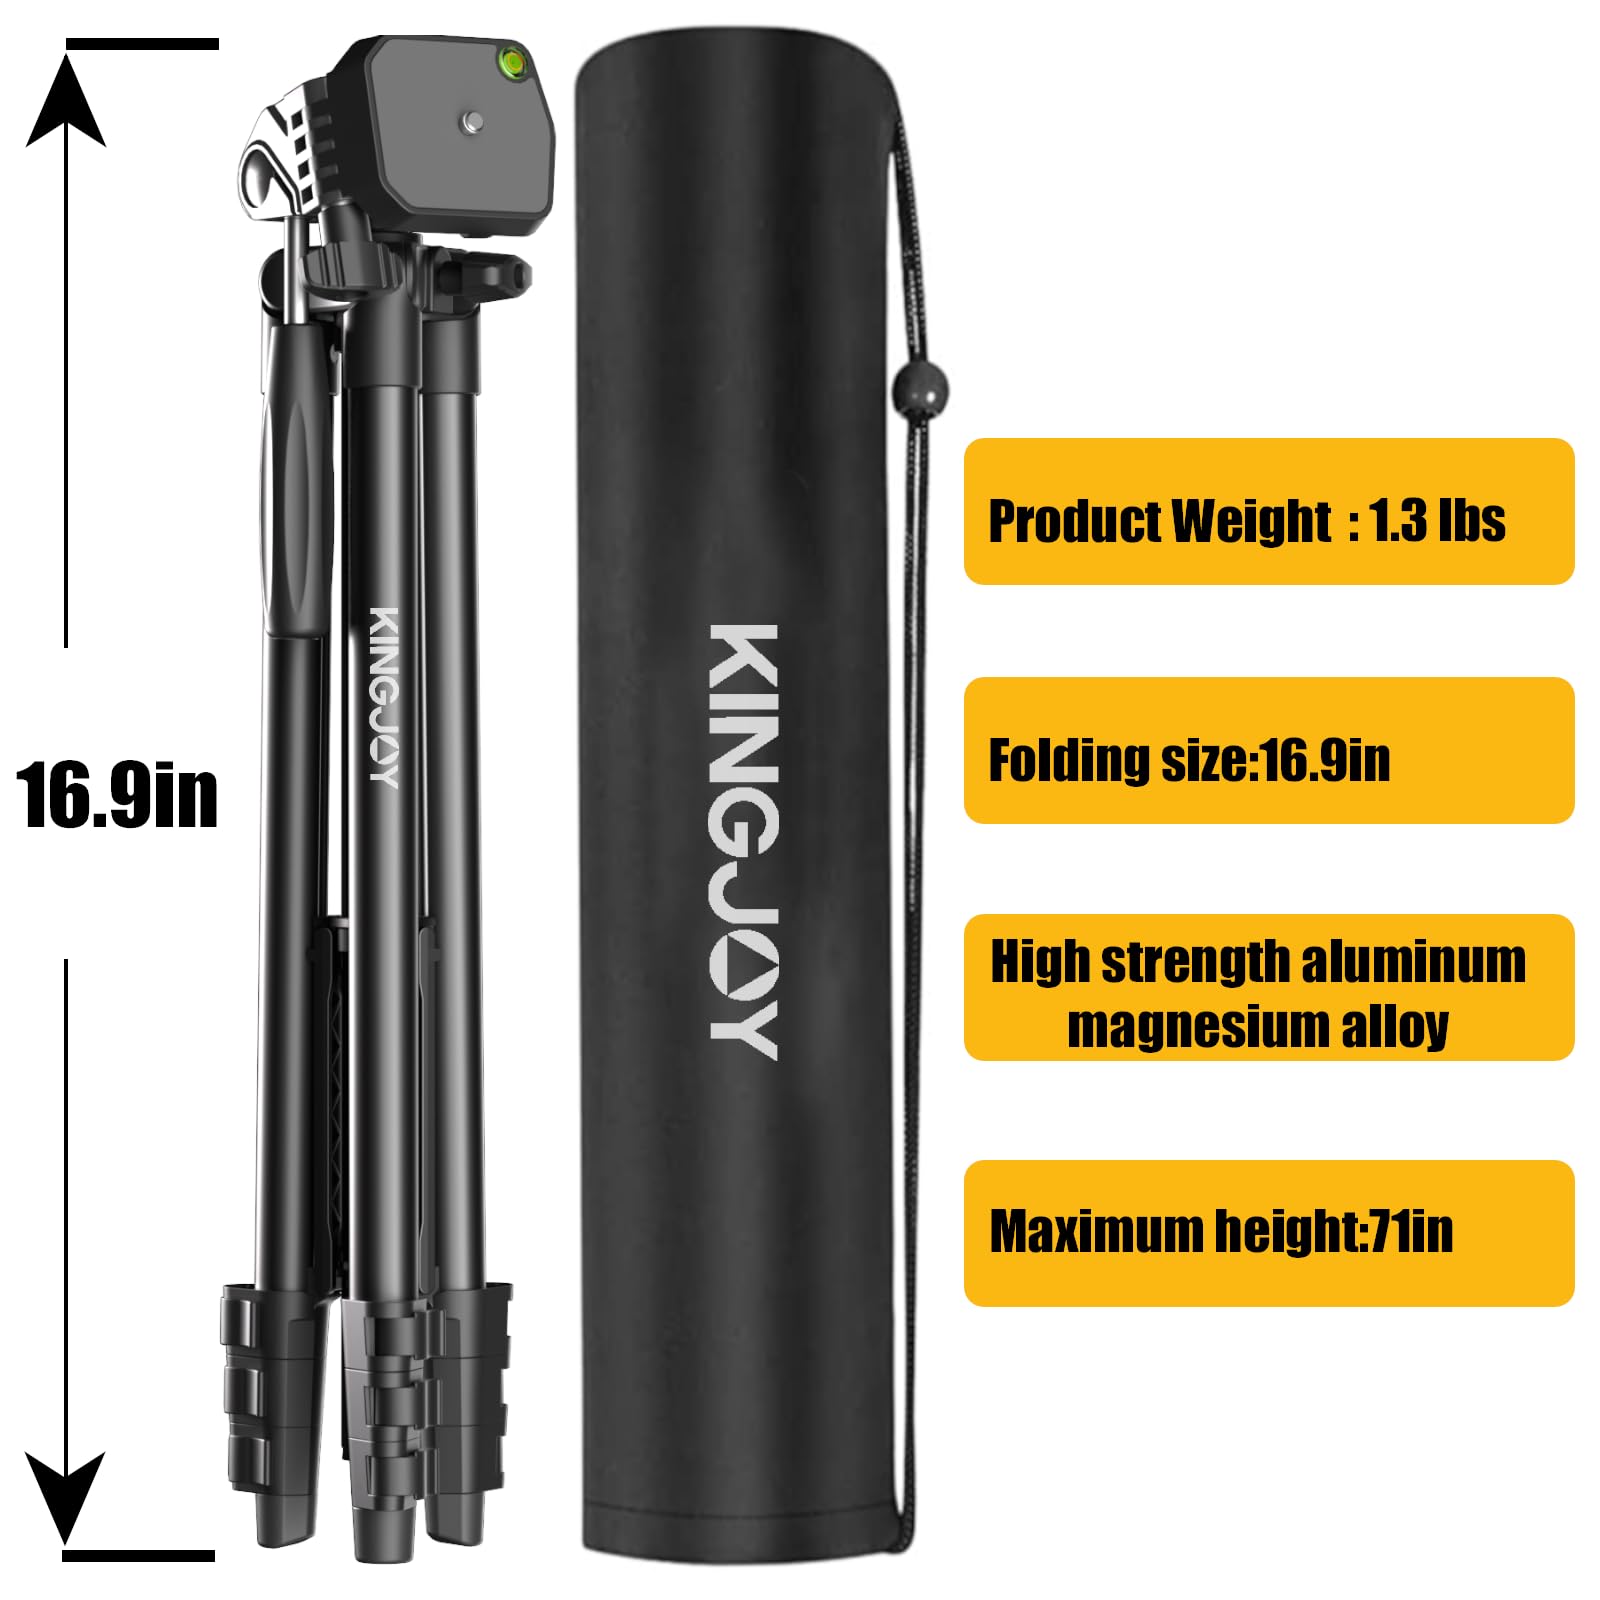 KINGJOY 71'' Camera Phone Tripod & Selfie Stick with Universal Tablet Phone Holder Remote Shutter and Carry Bag Aluminum Portable Tripod Stand Compatible with Phone/Camera/Projector/DSLR